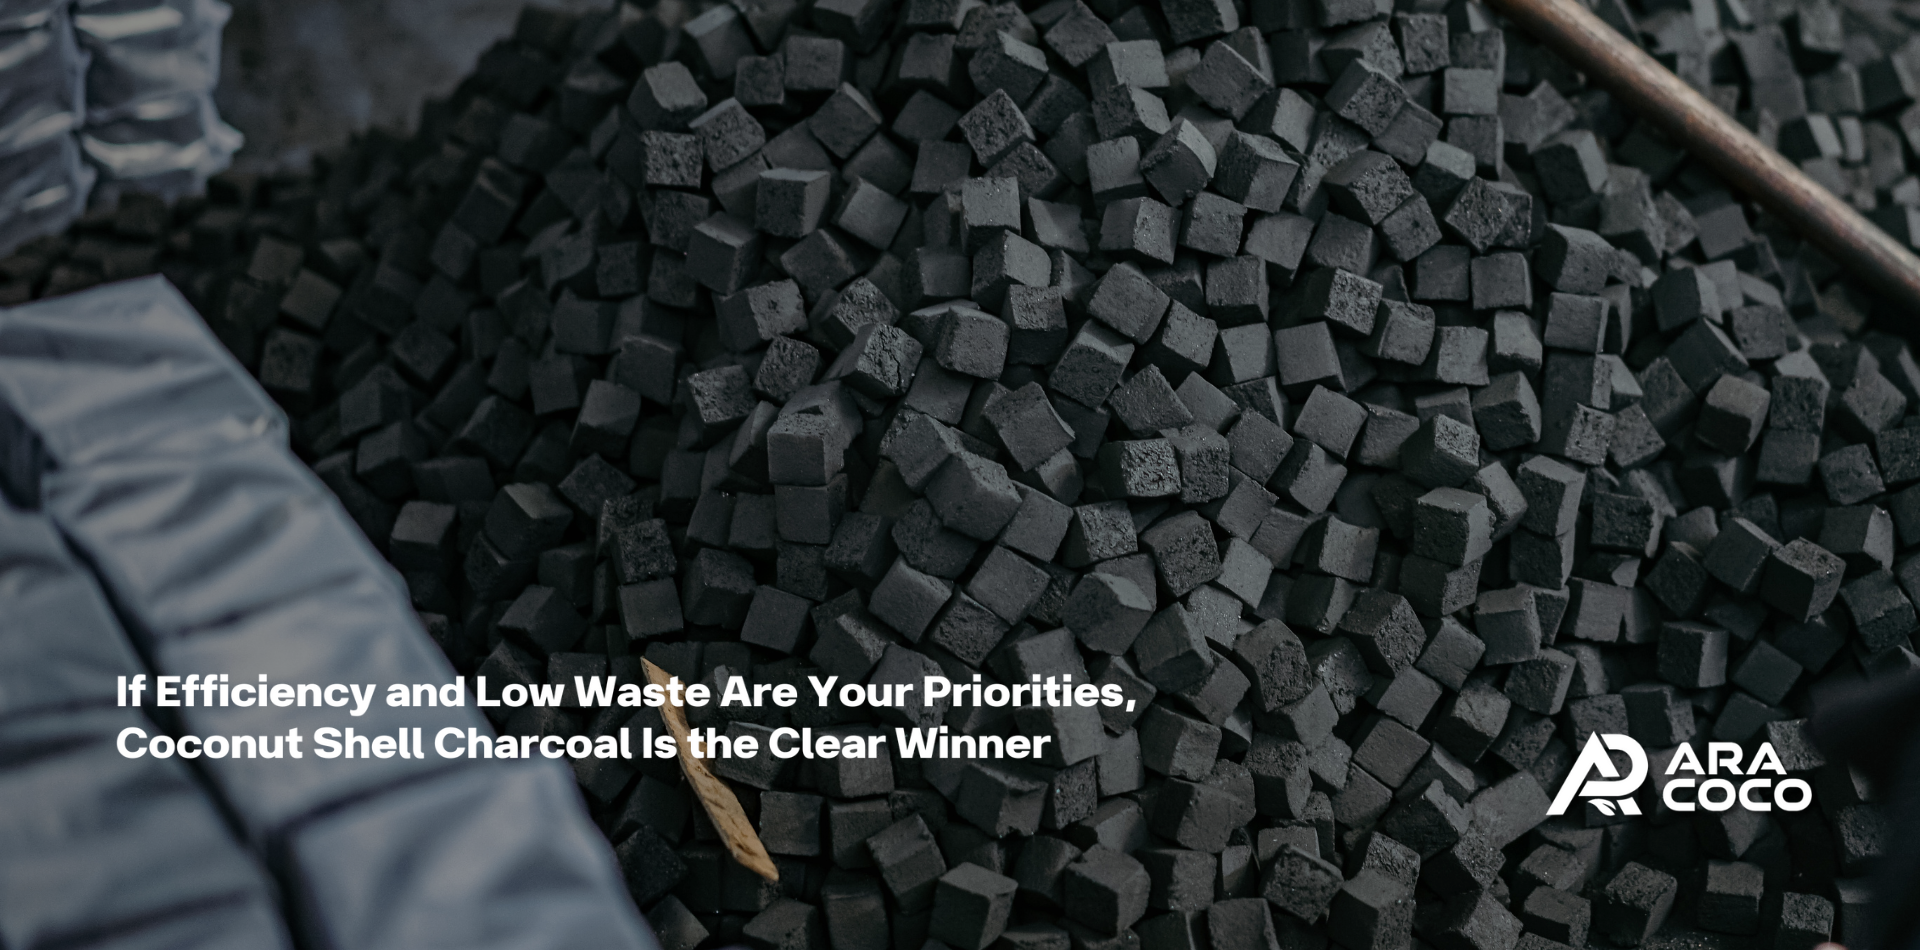 While both types of charcoal have their merits, coconut shell charcoal stands out in terms of efficiency and sustainability